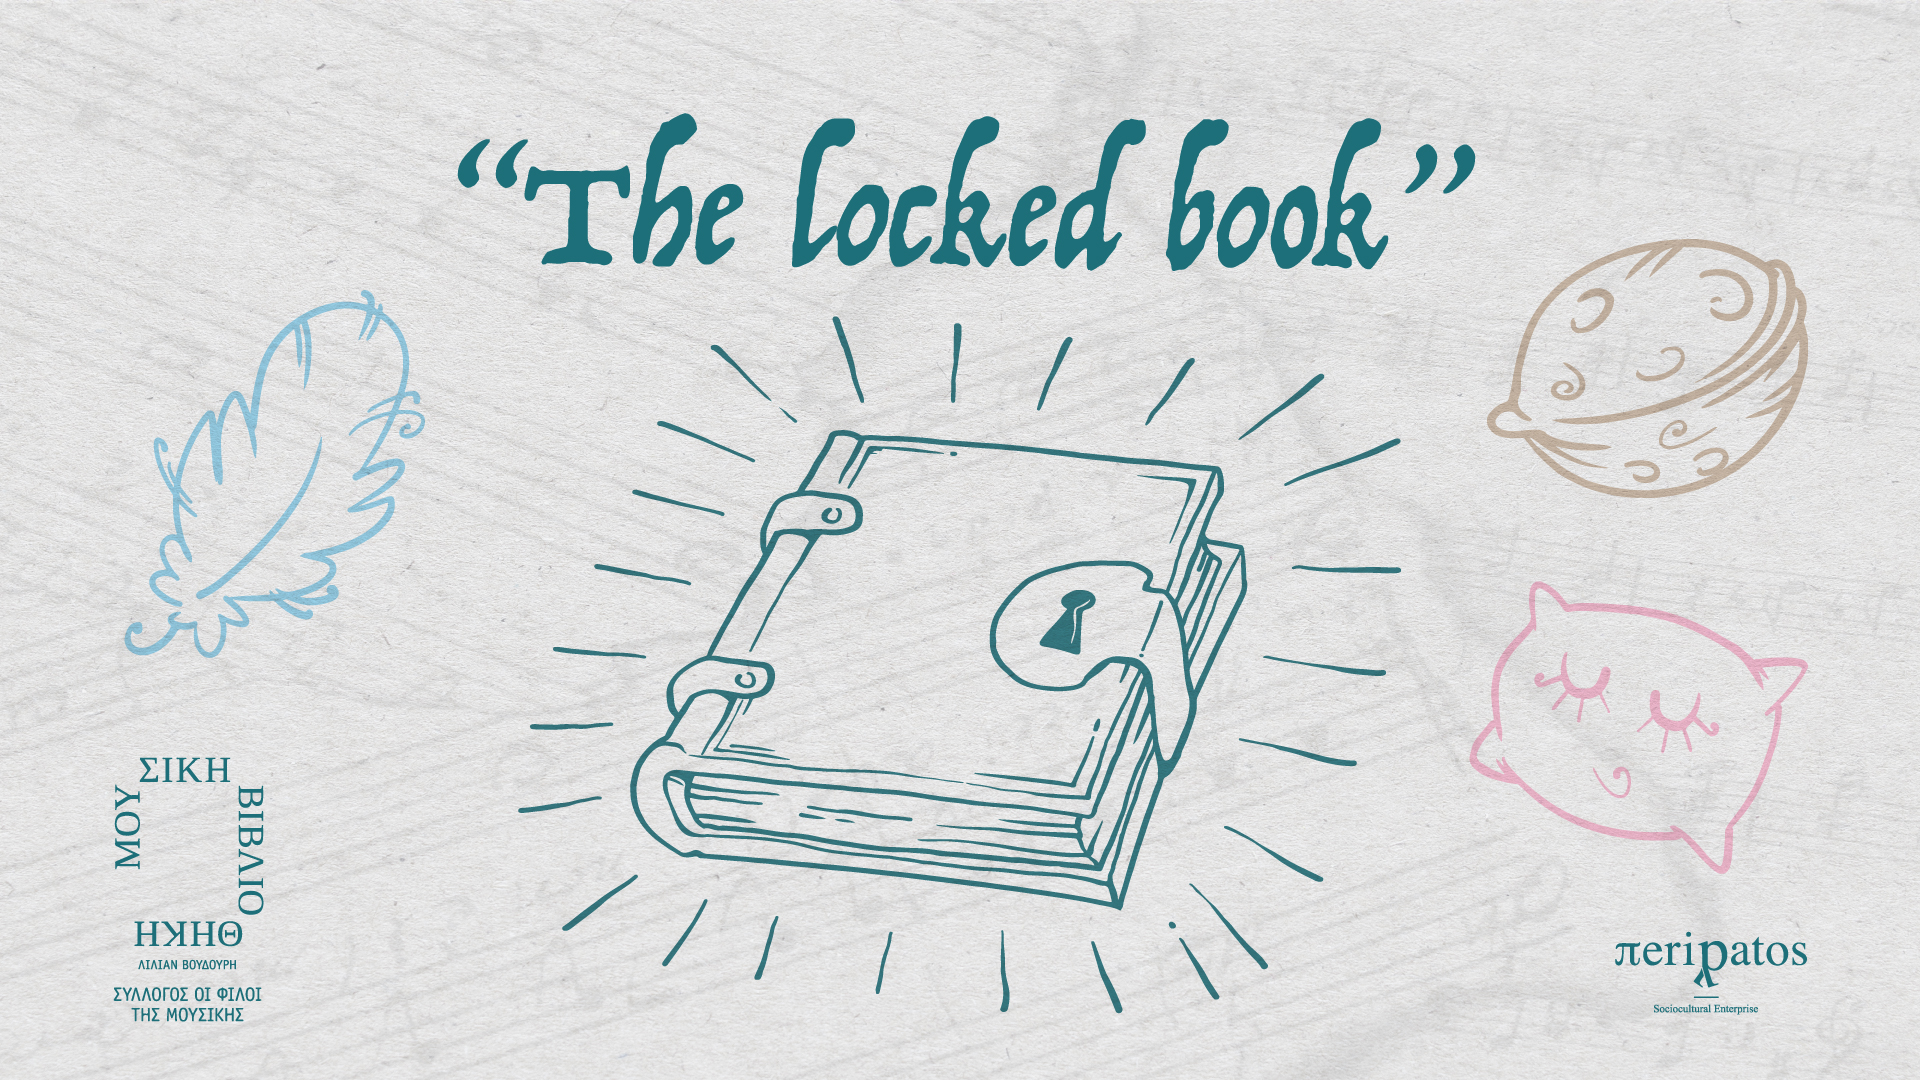 The locked book